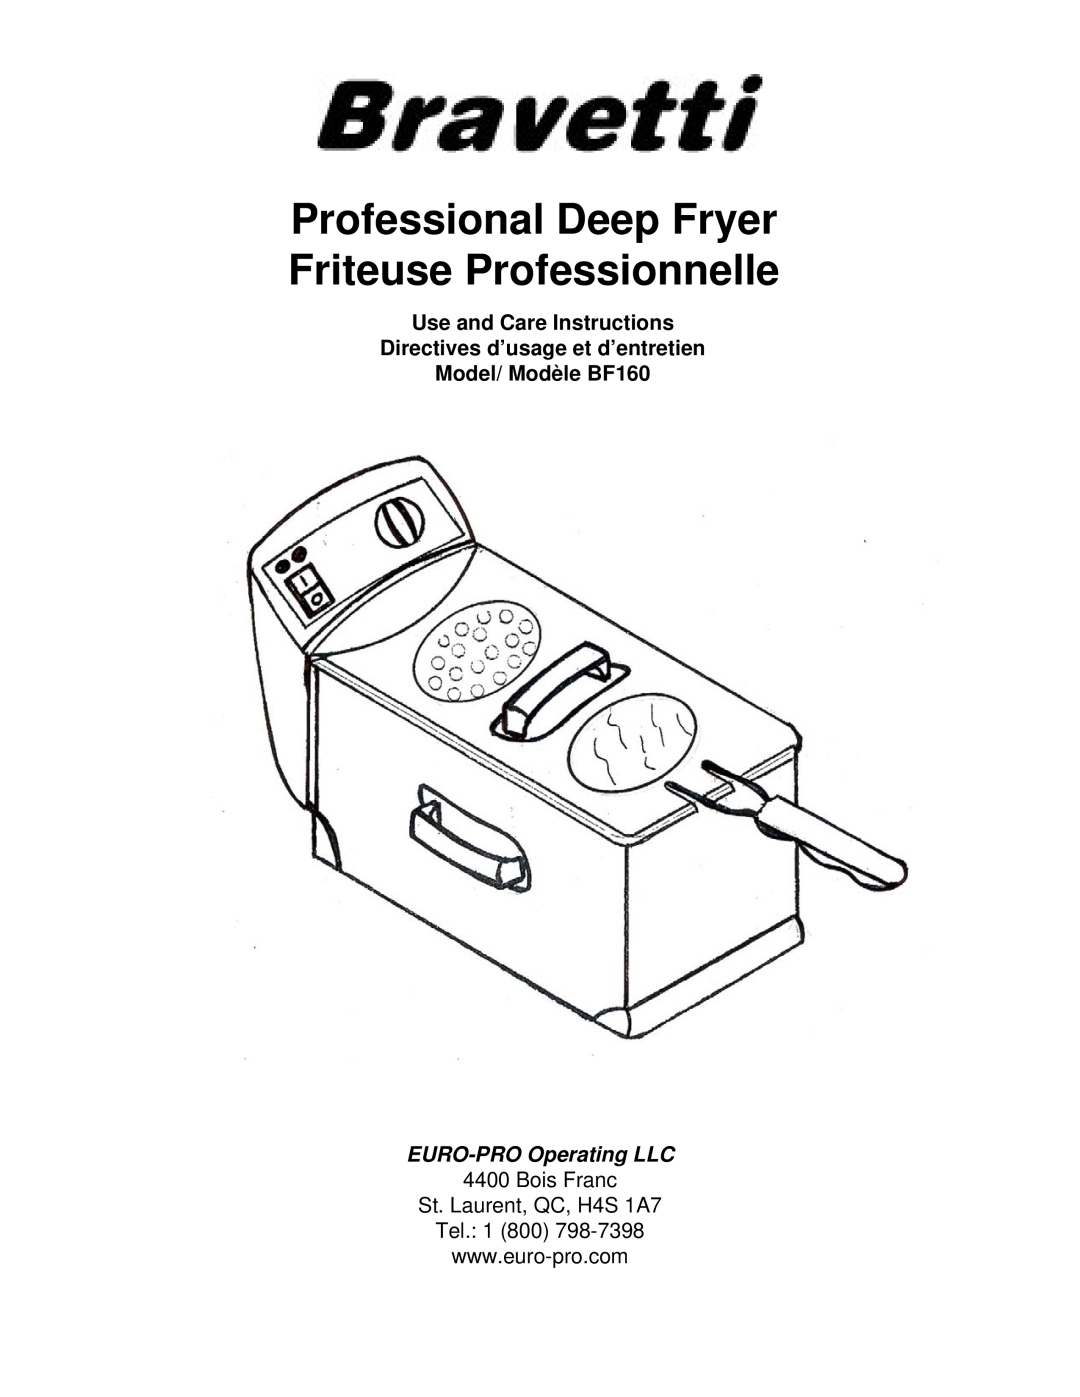 Euro-Pro manual Professional Deep Fryer Friteuse Professionnelle, Use and Care Instructions, Model/ Modèle BF160 